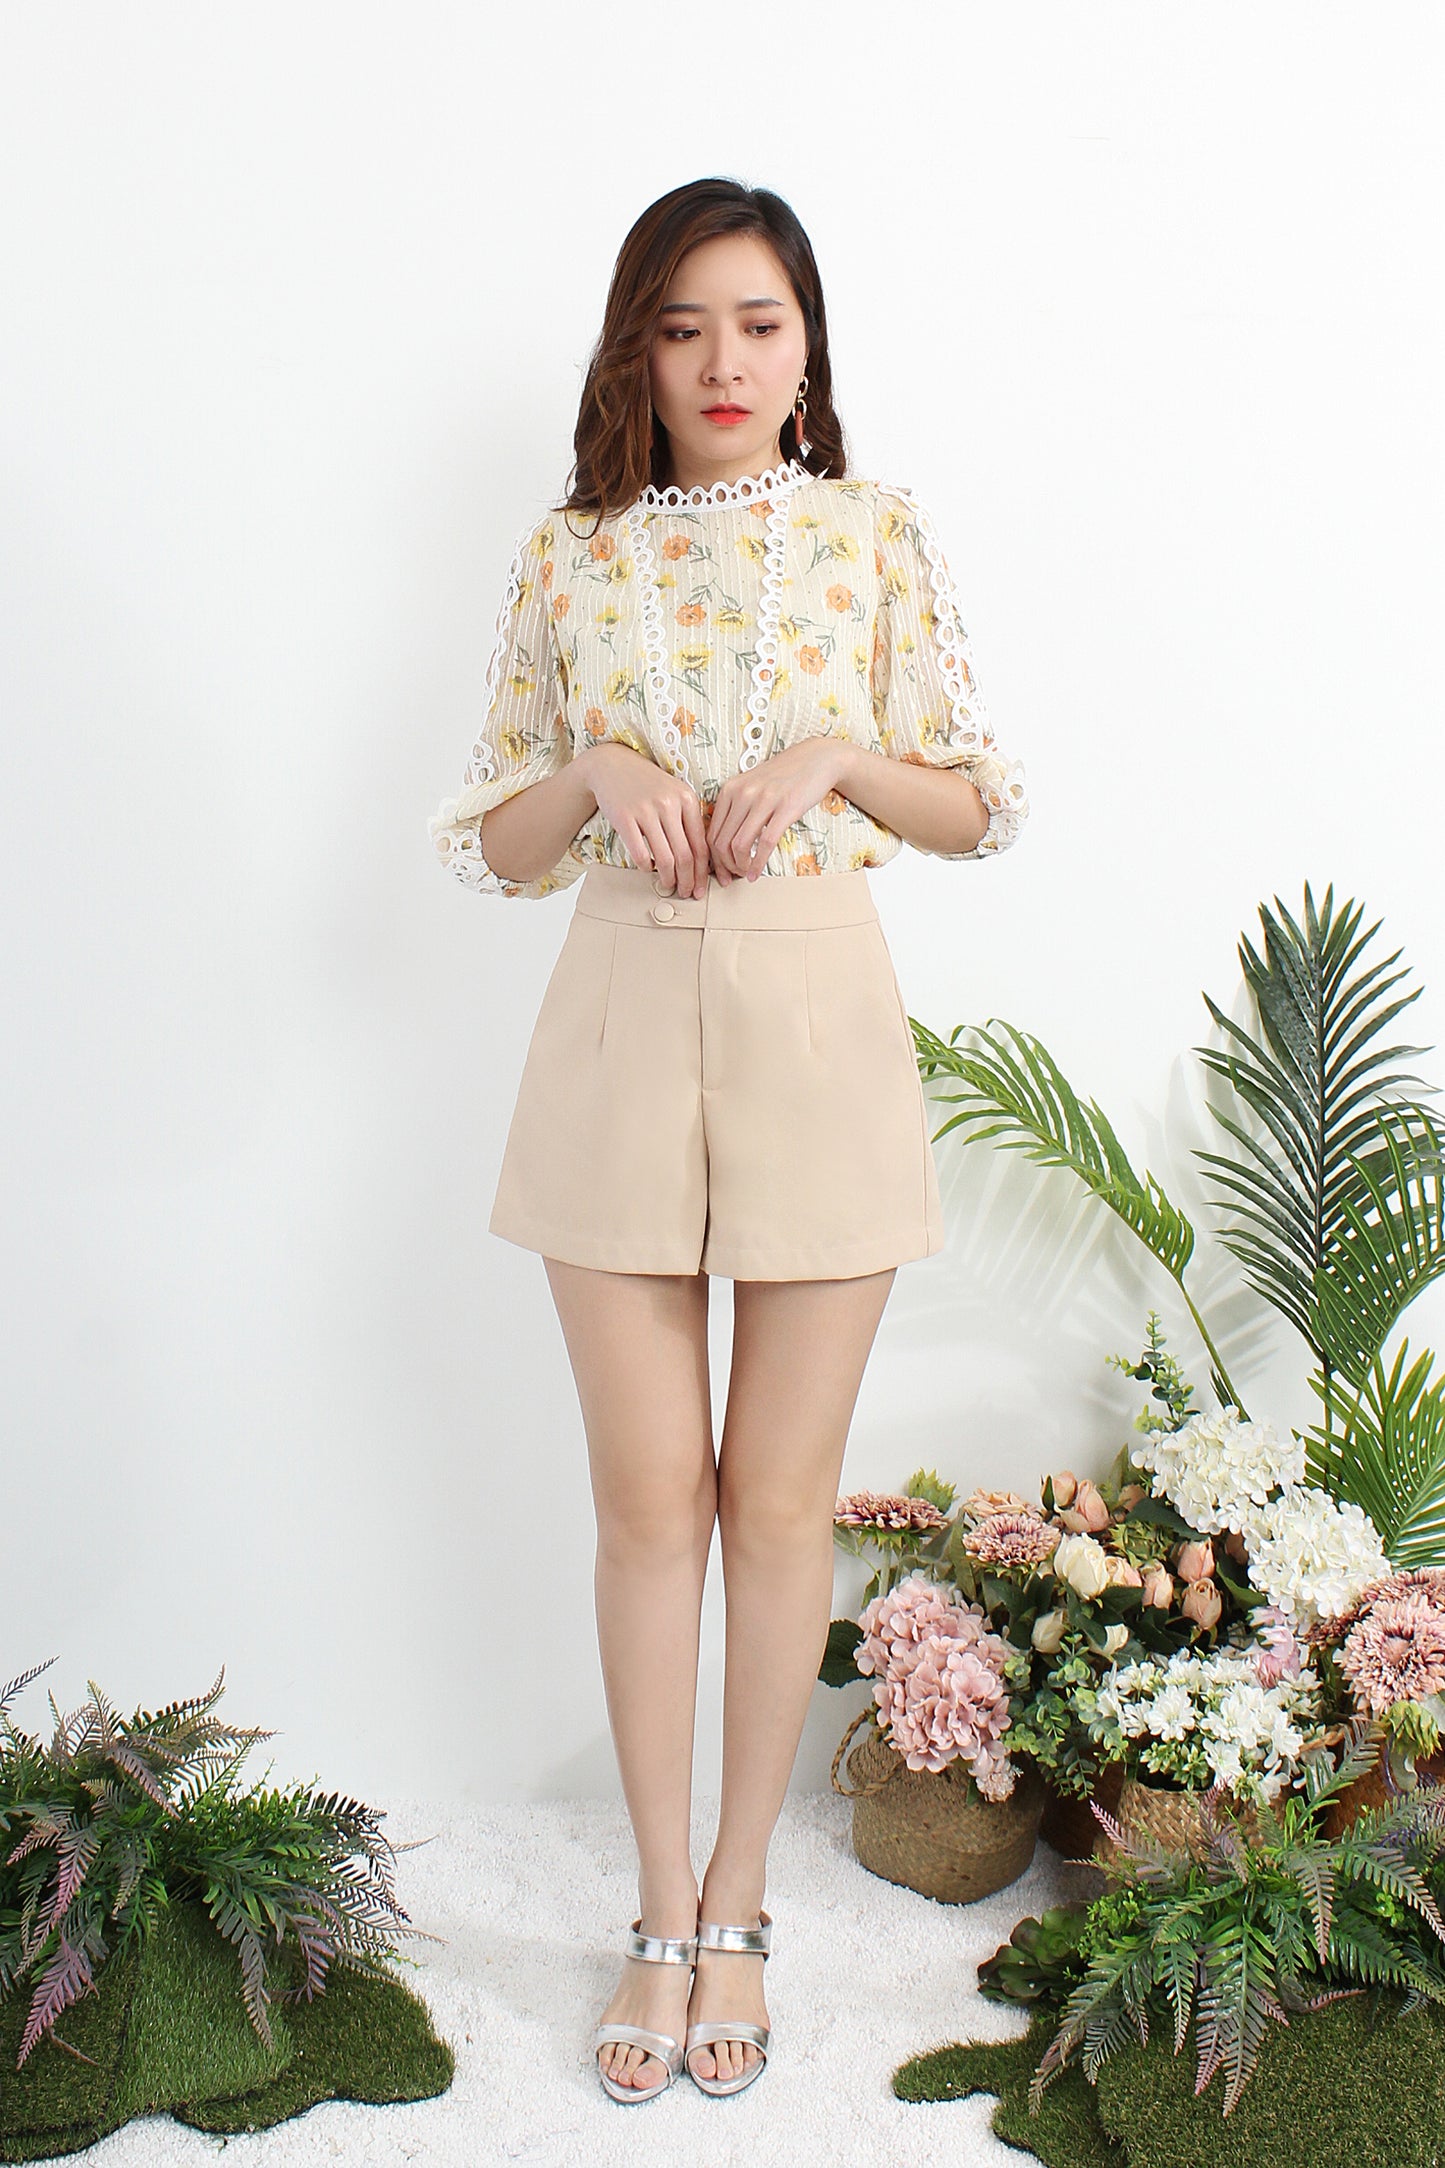 Antheia Floral Printed Blouse With Lace